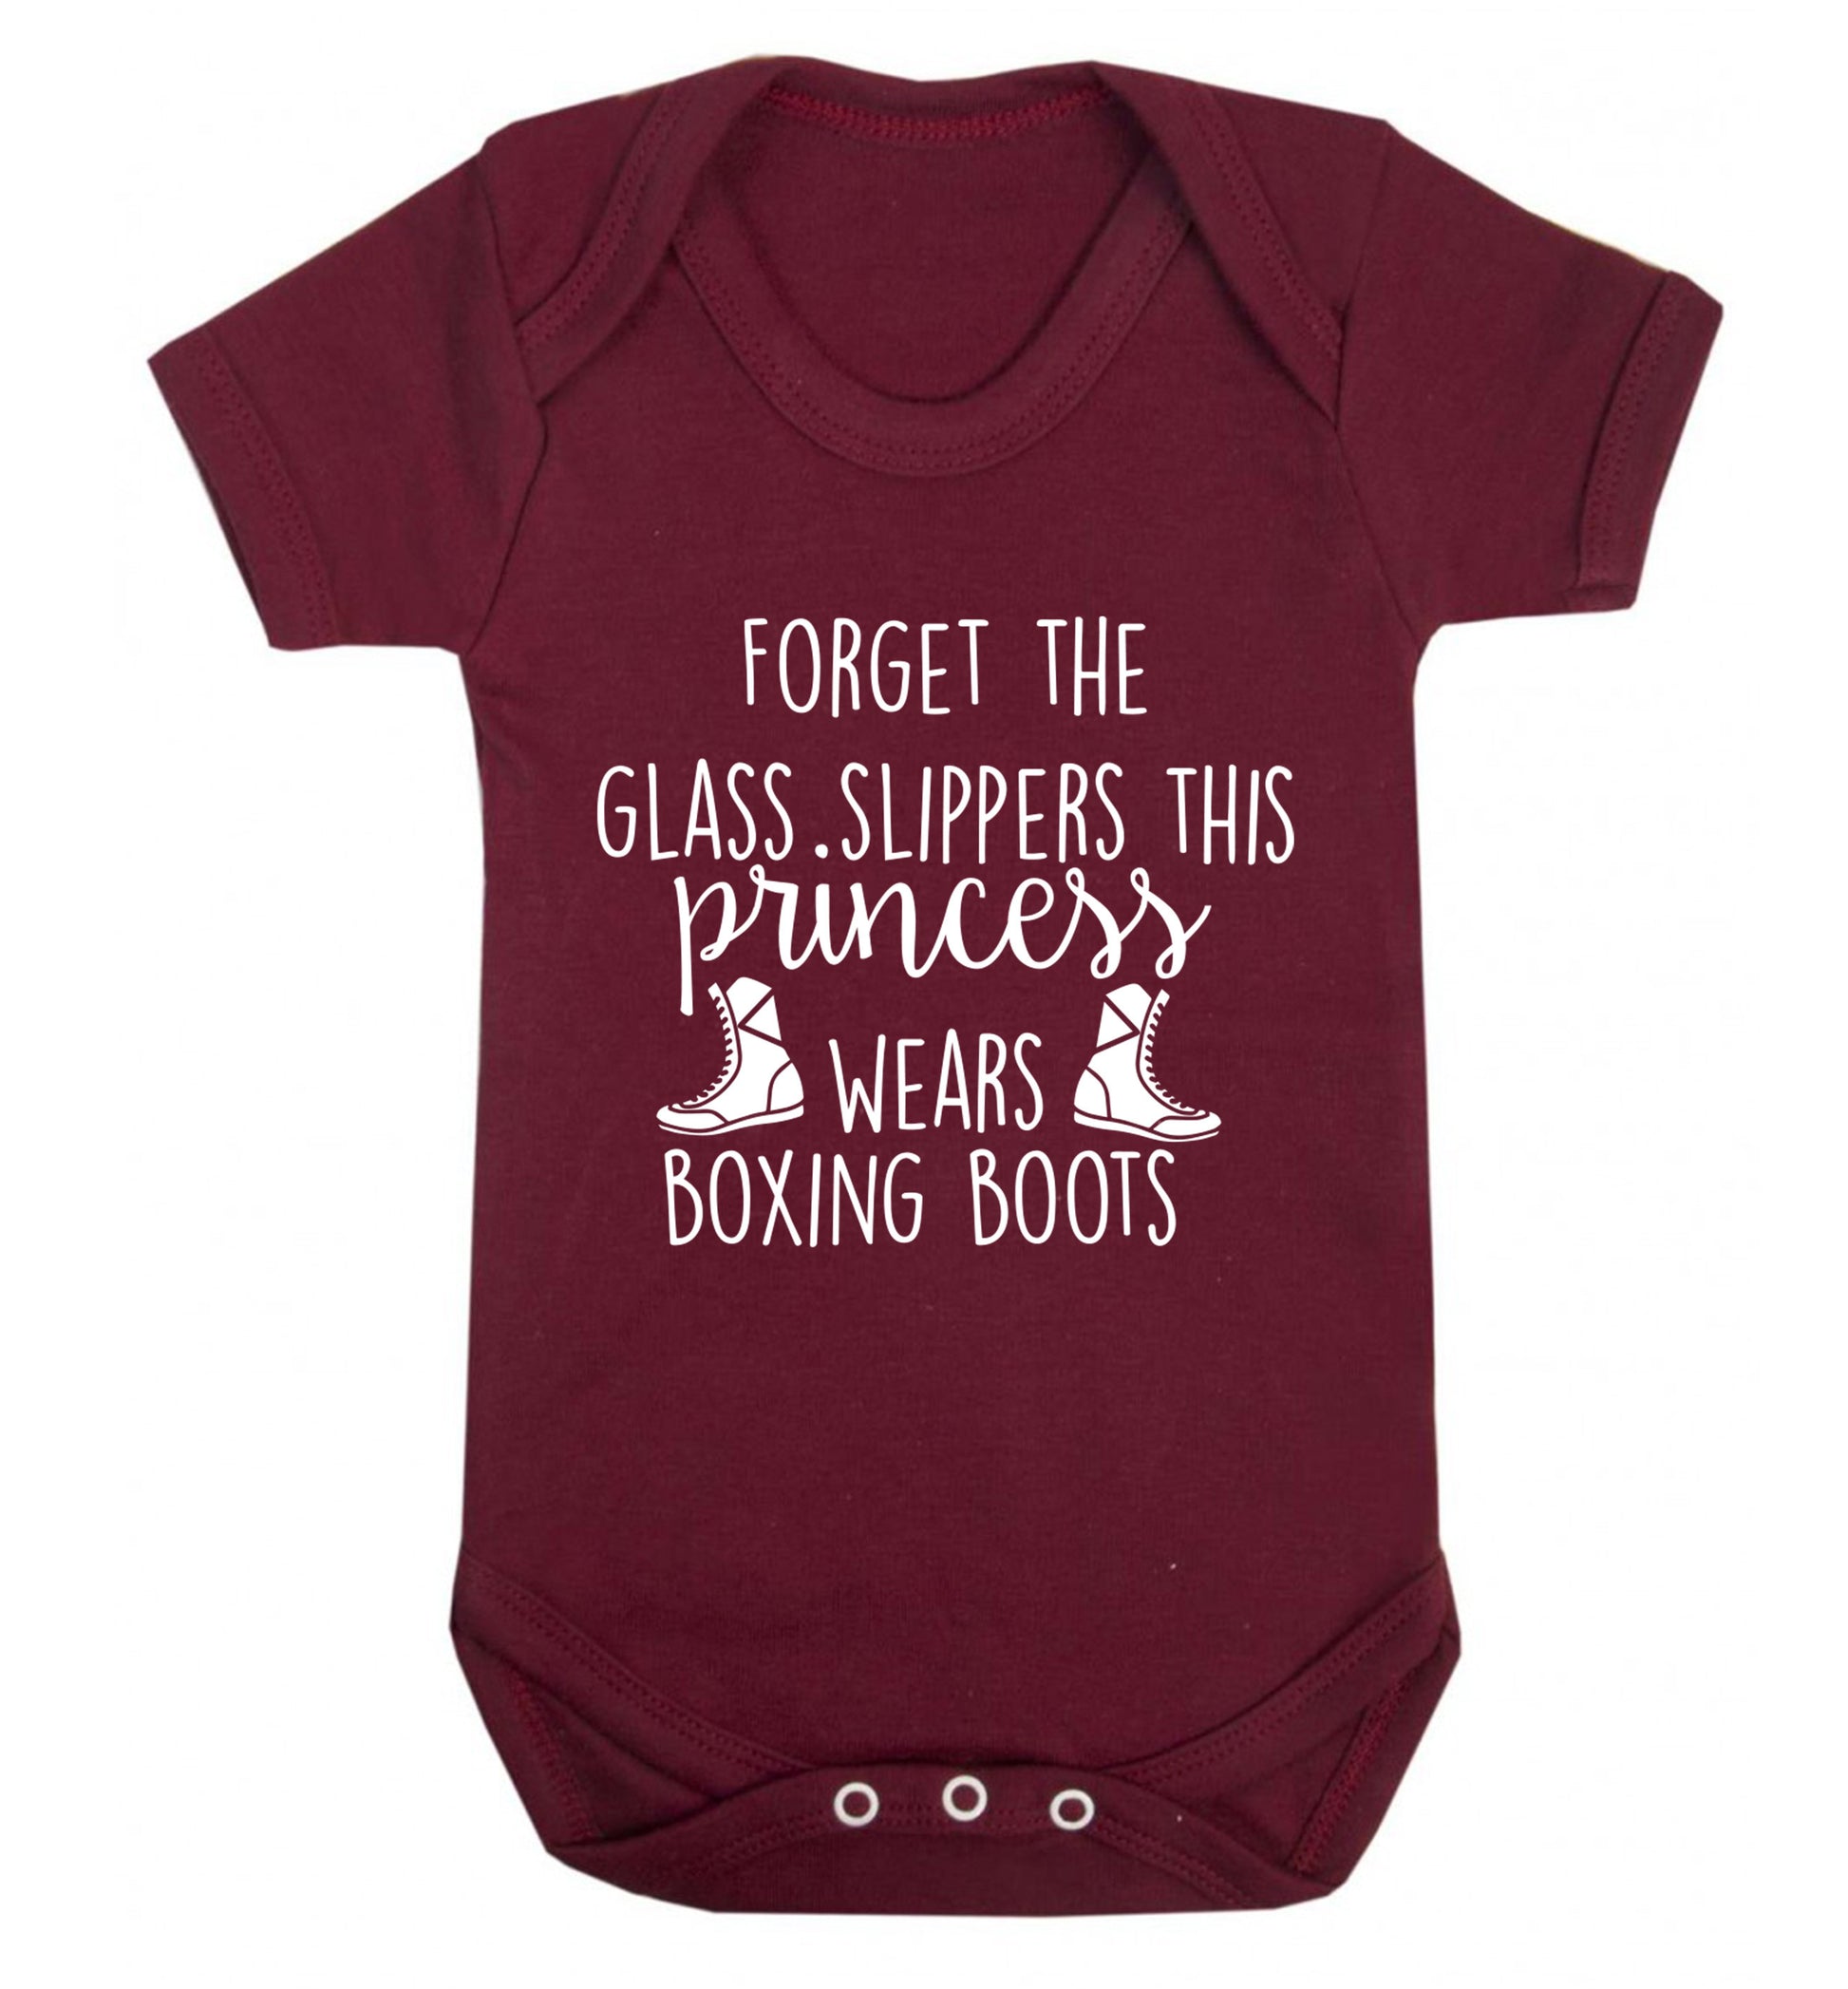 Forget the glass slippers this princess wears boxing boots Baby Vest maroon 18-24 months